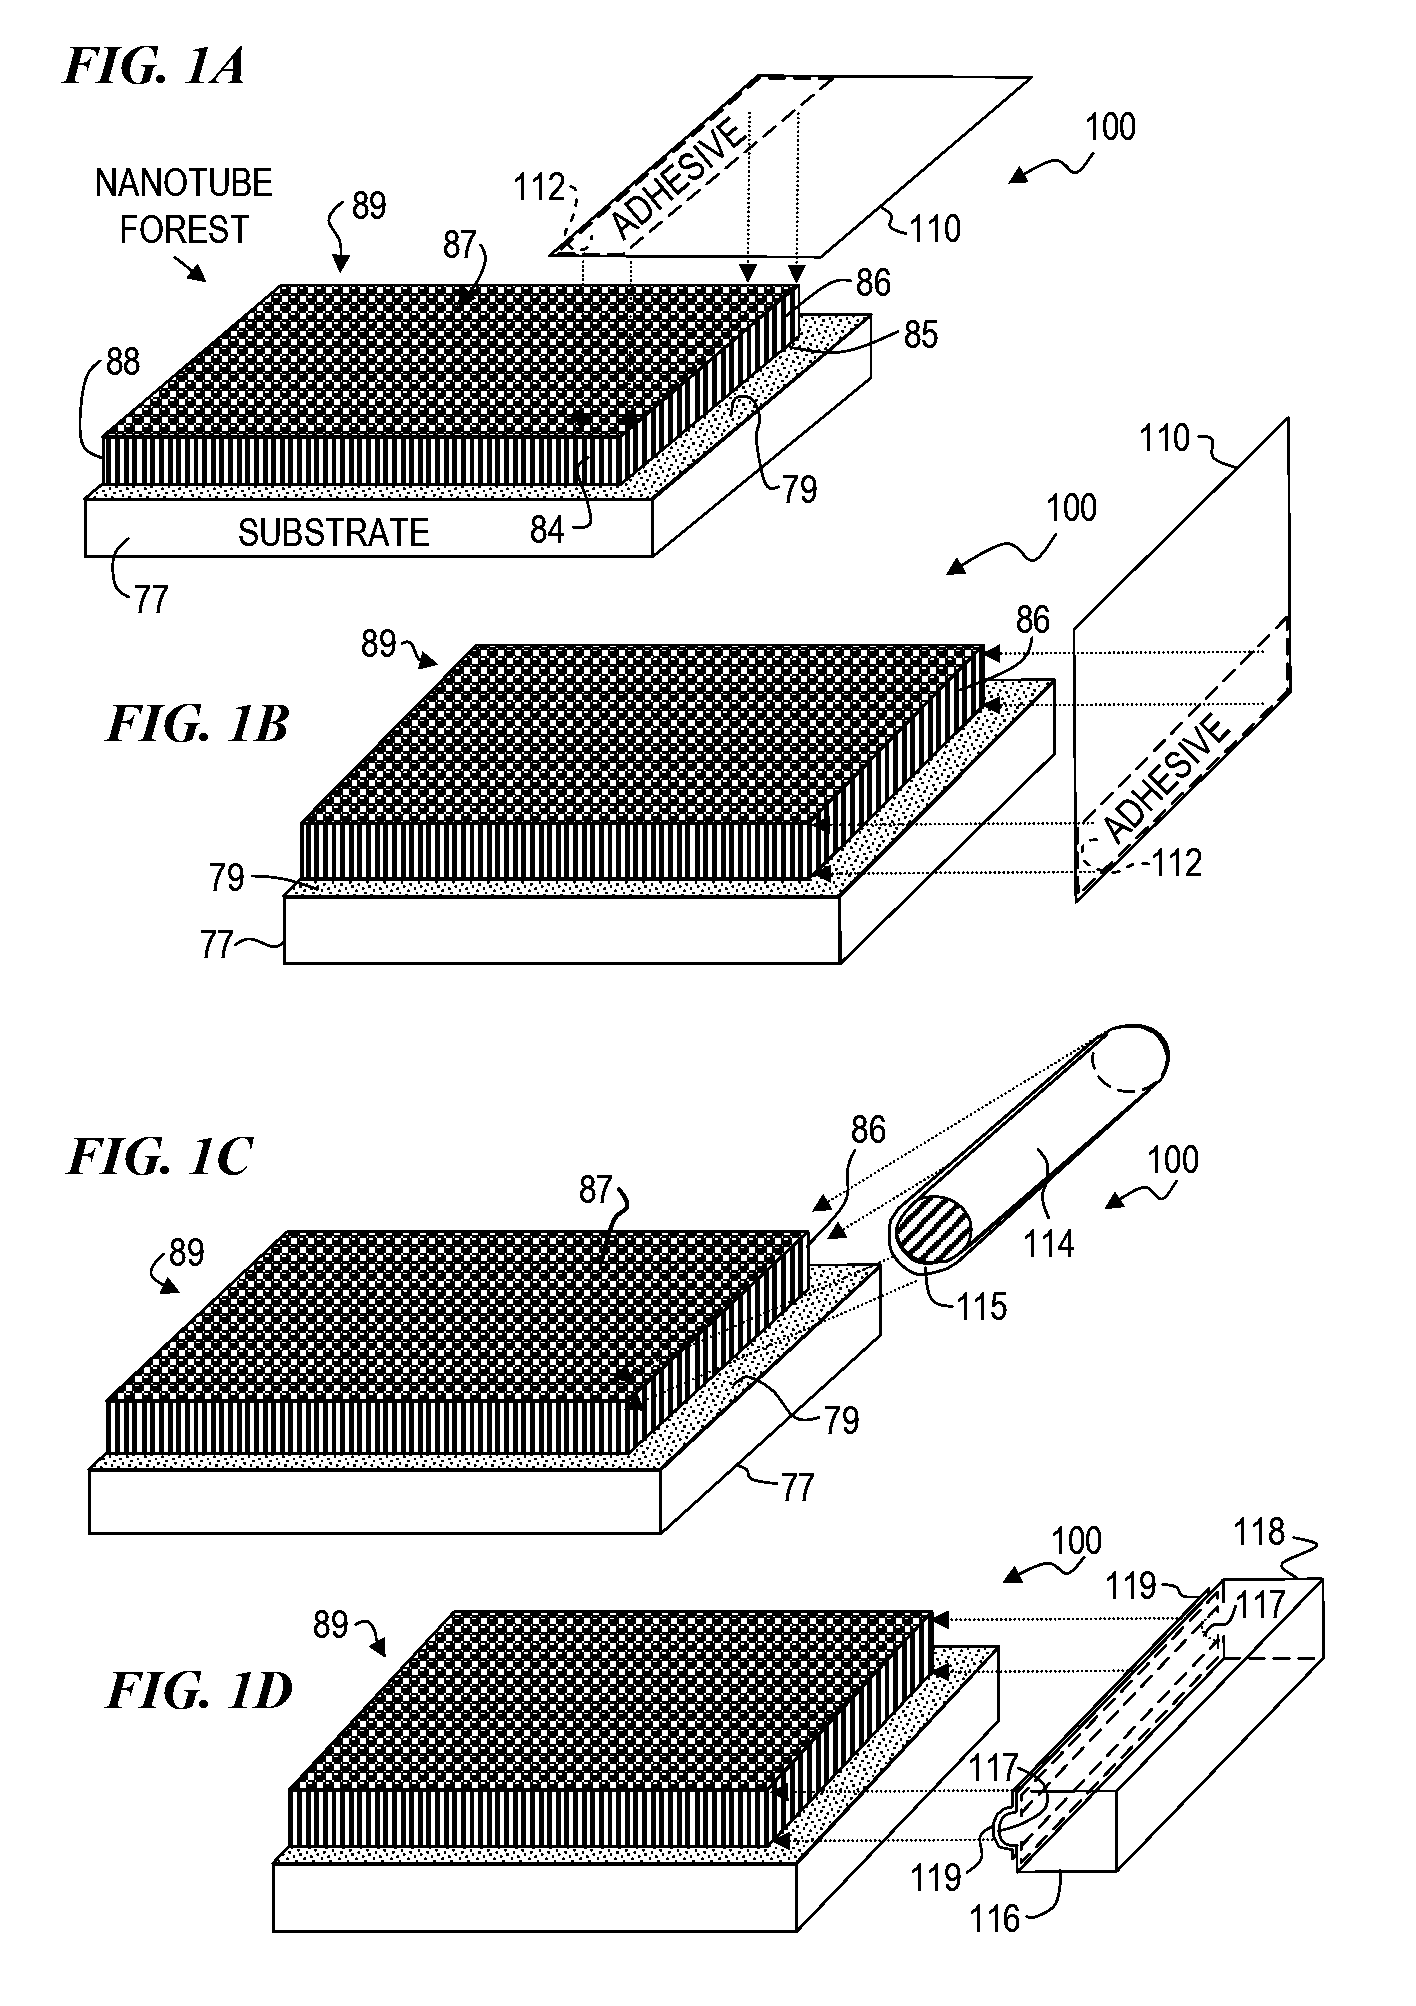 Apparatus and method for growing fullerene nanotube forests, and forming nanotube films, threads and composite structures therefrom